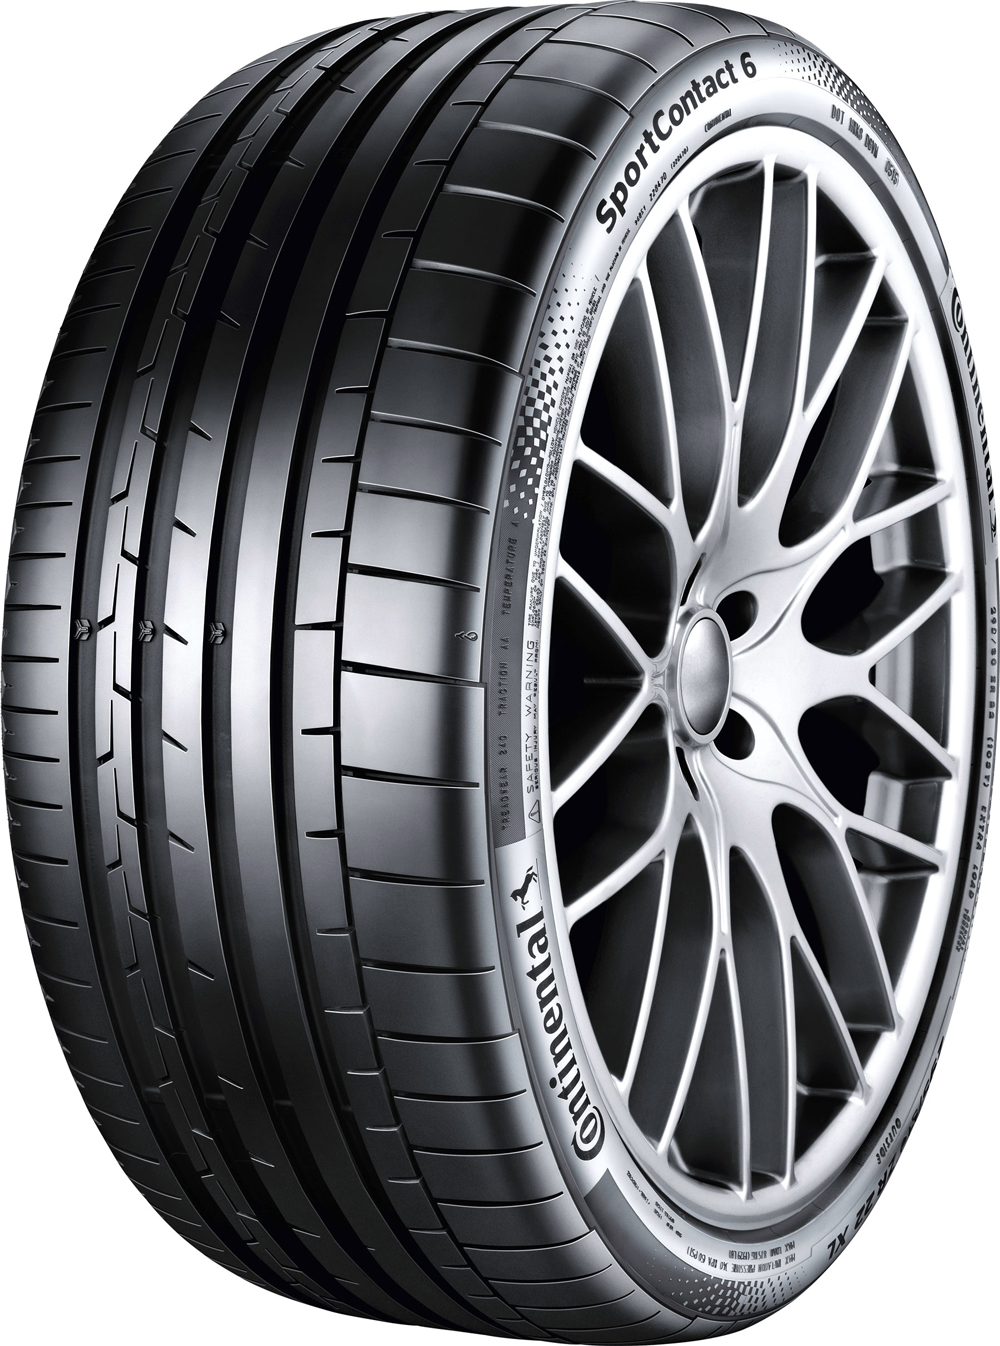 Гуми за кола CONTINENTAL SportContact 6 ContiSilent XL AUDI 285/35 R23 107Y